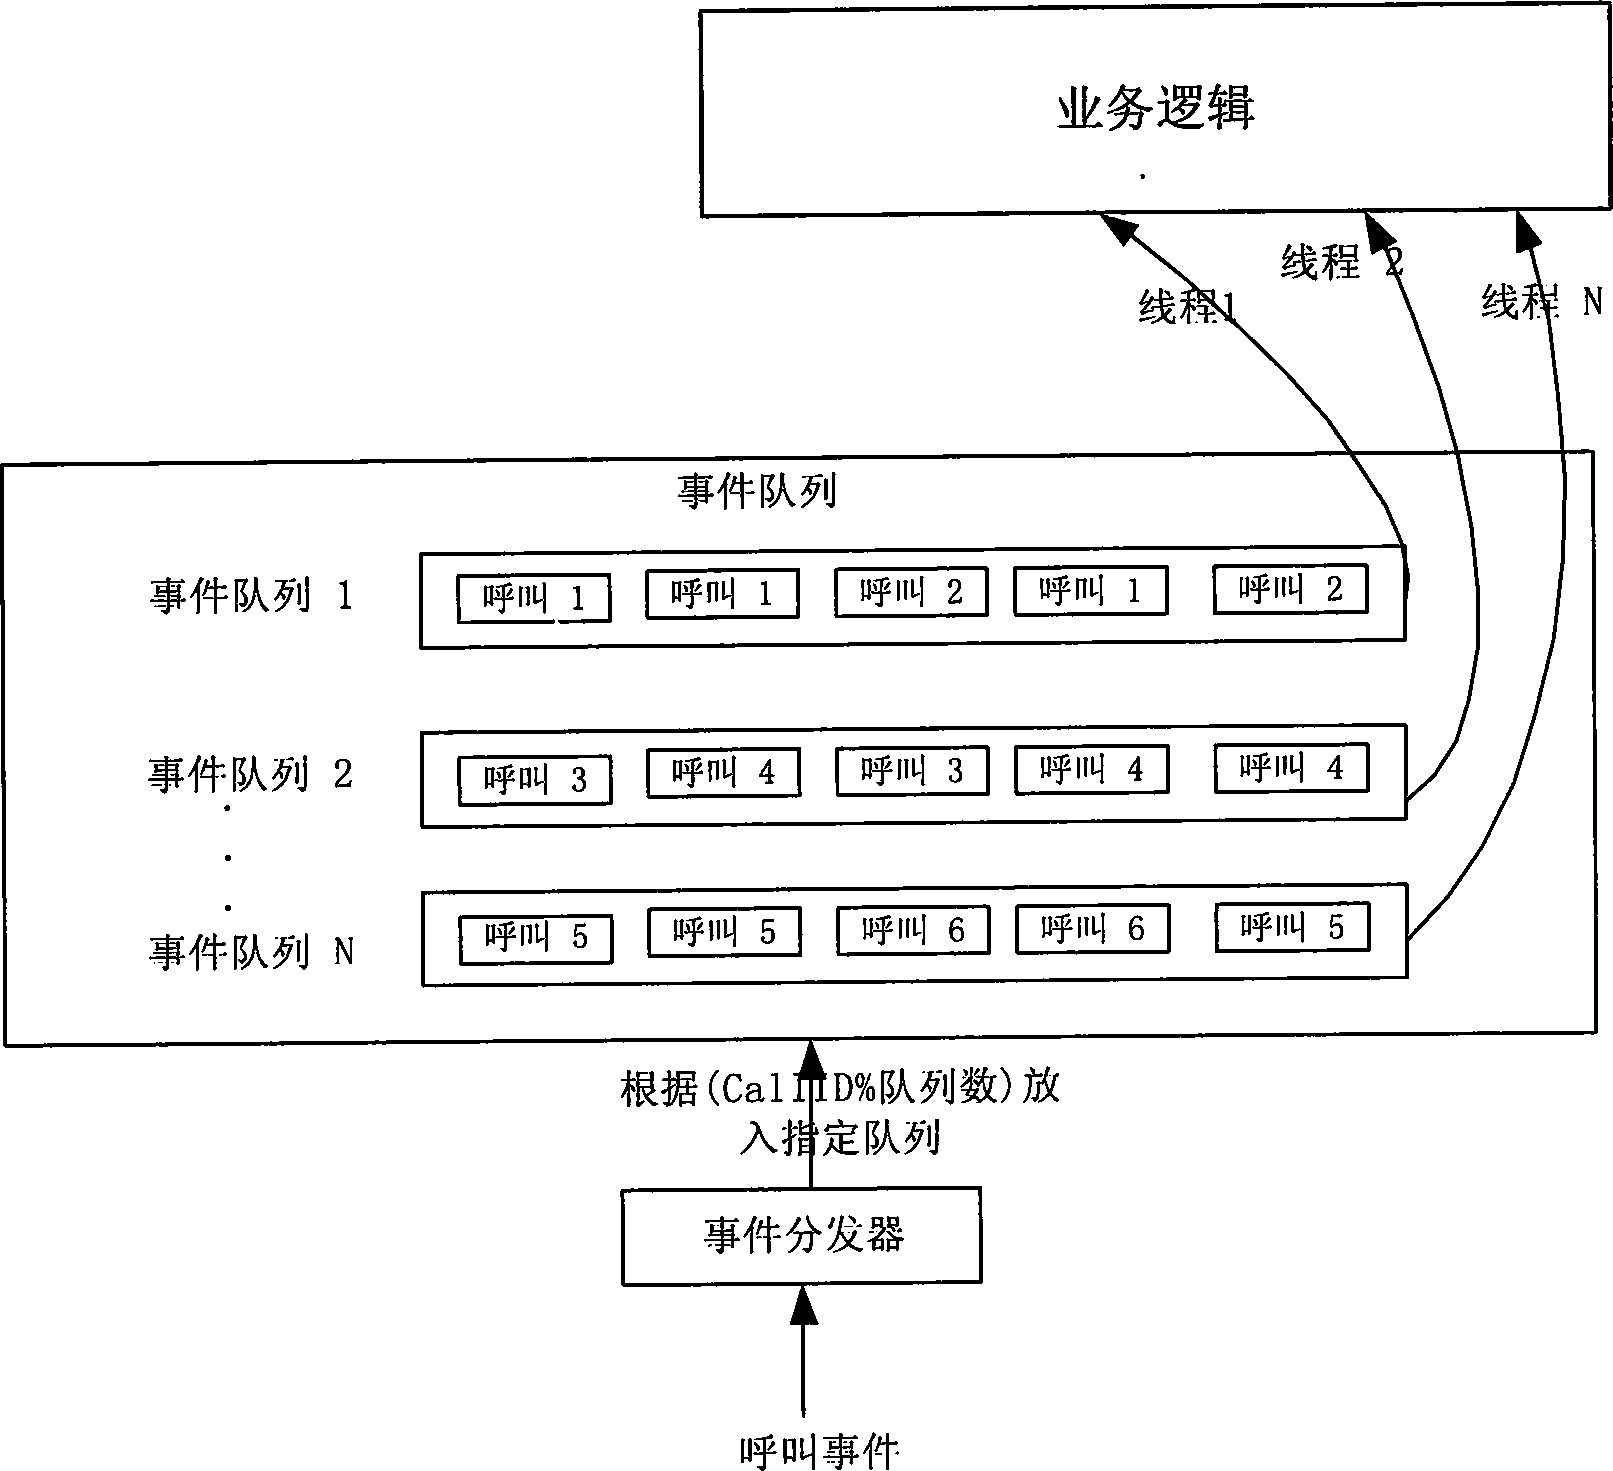 Concurrent method for treating calling events